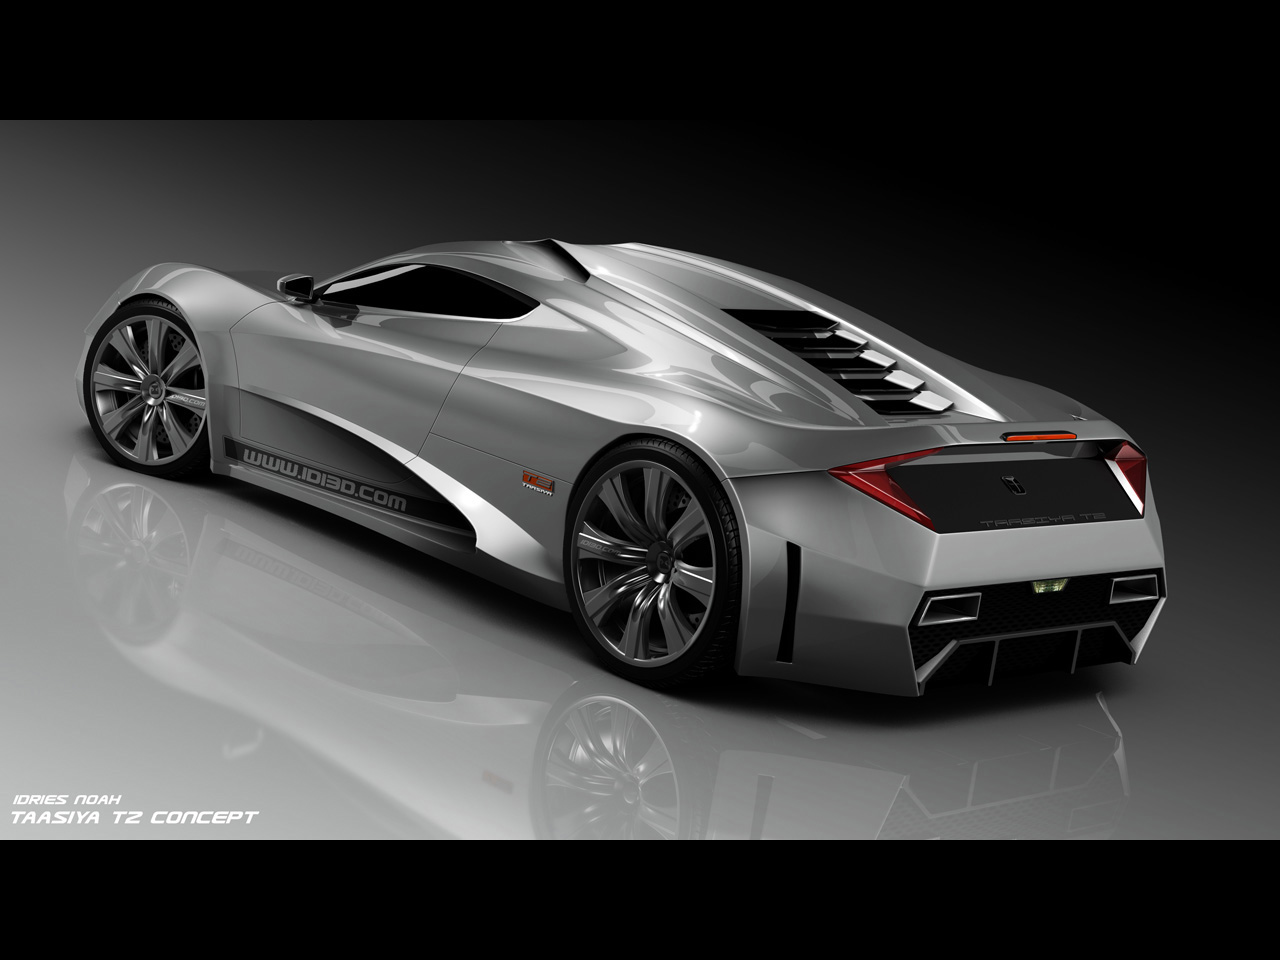 2010 T2 Concept by Idries Noah